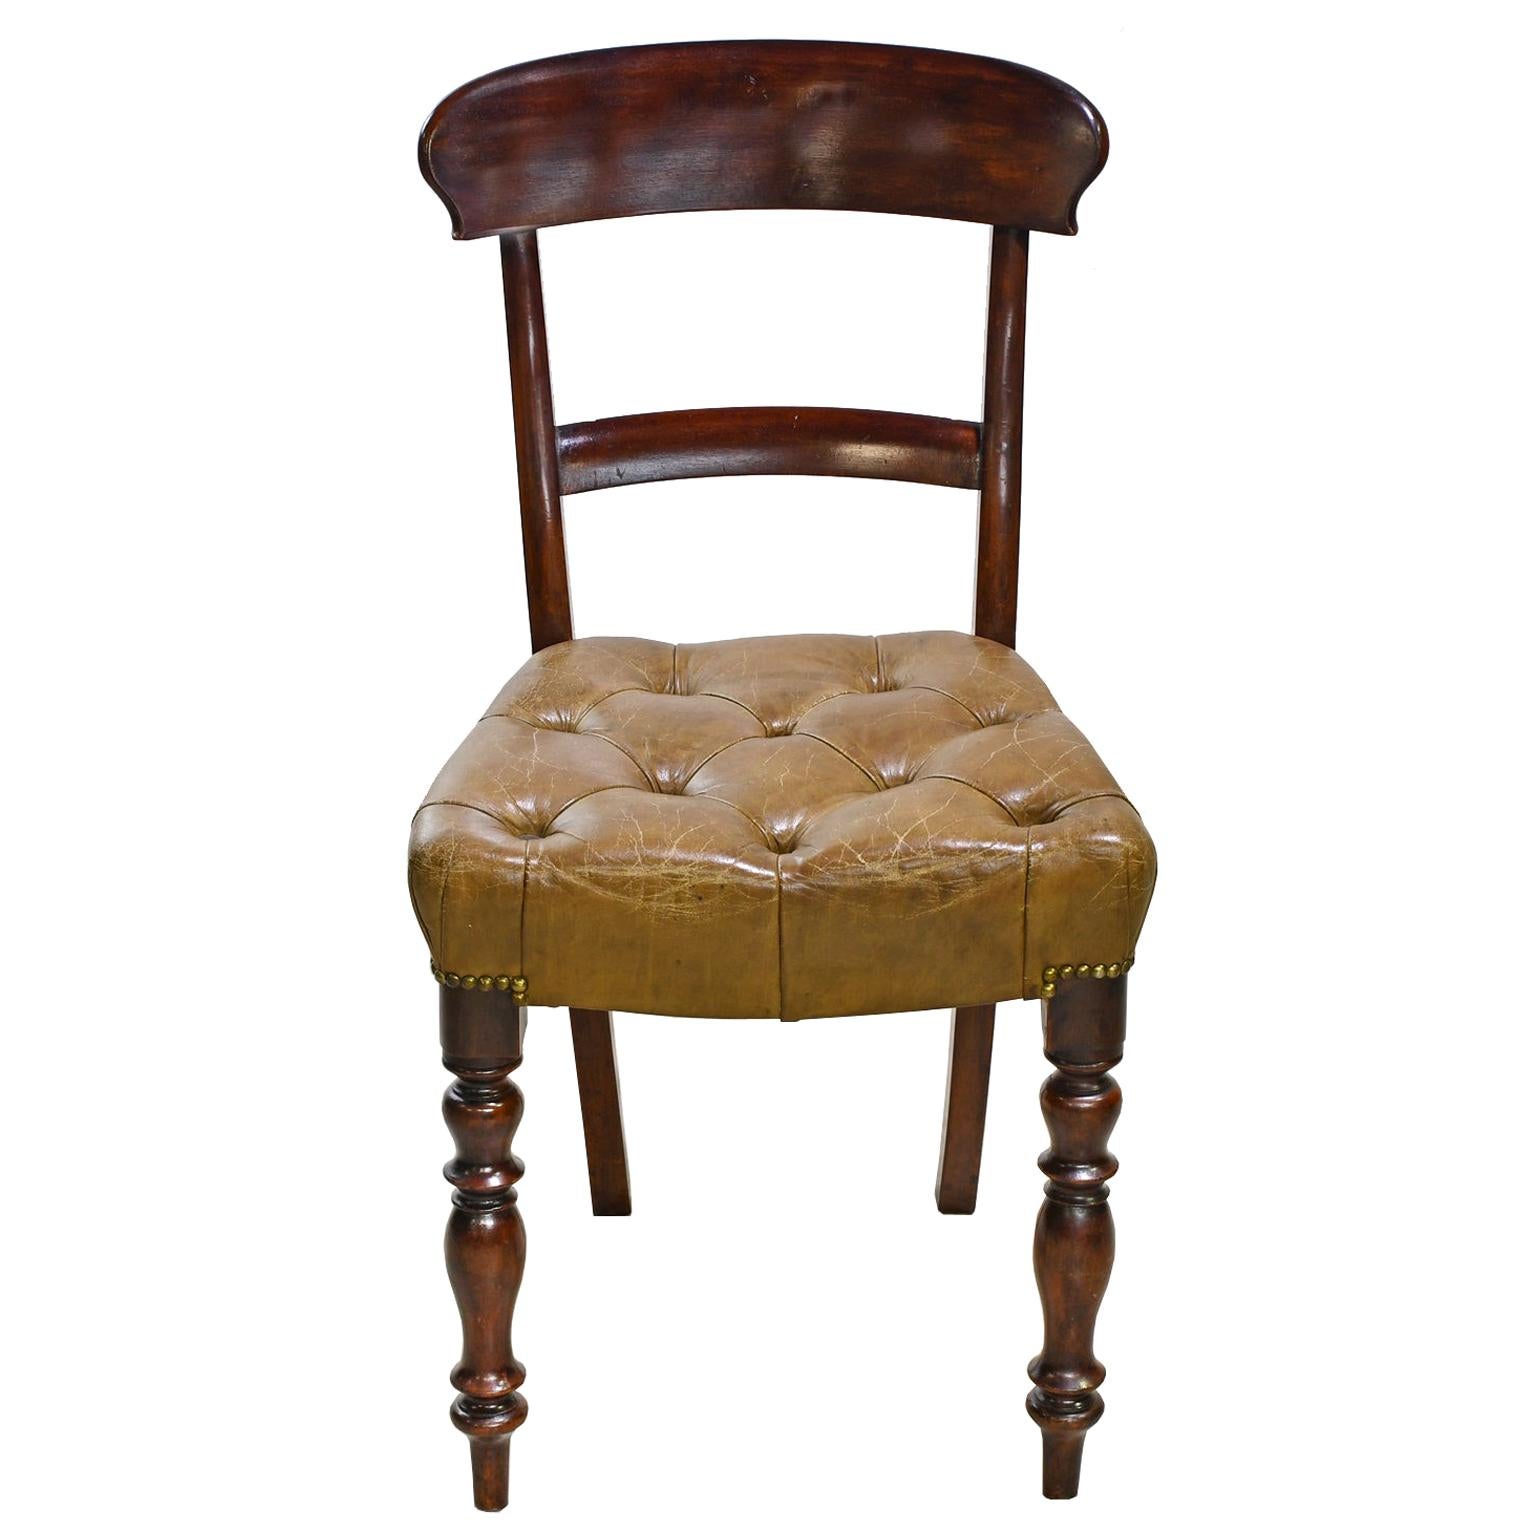 Early Victorian Mahogany Chair with Tufted Leather Upholstery, England